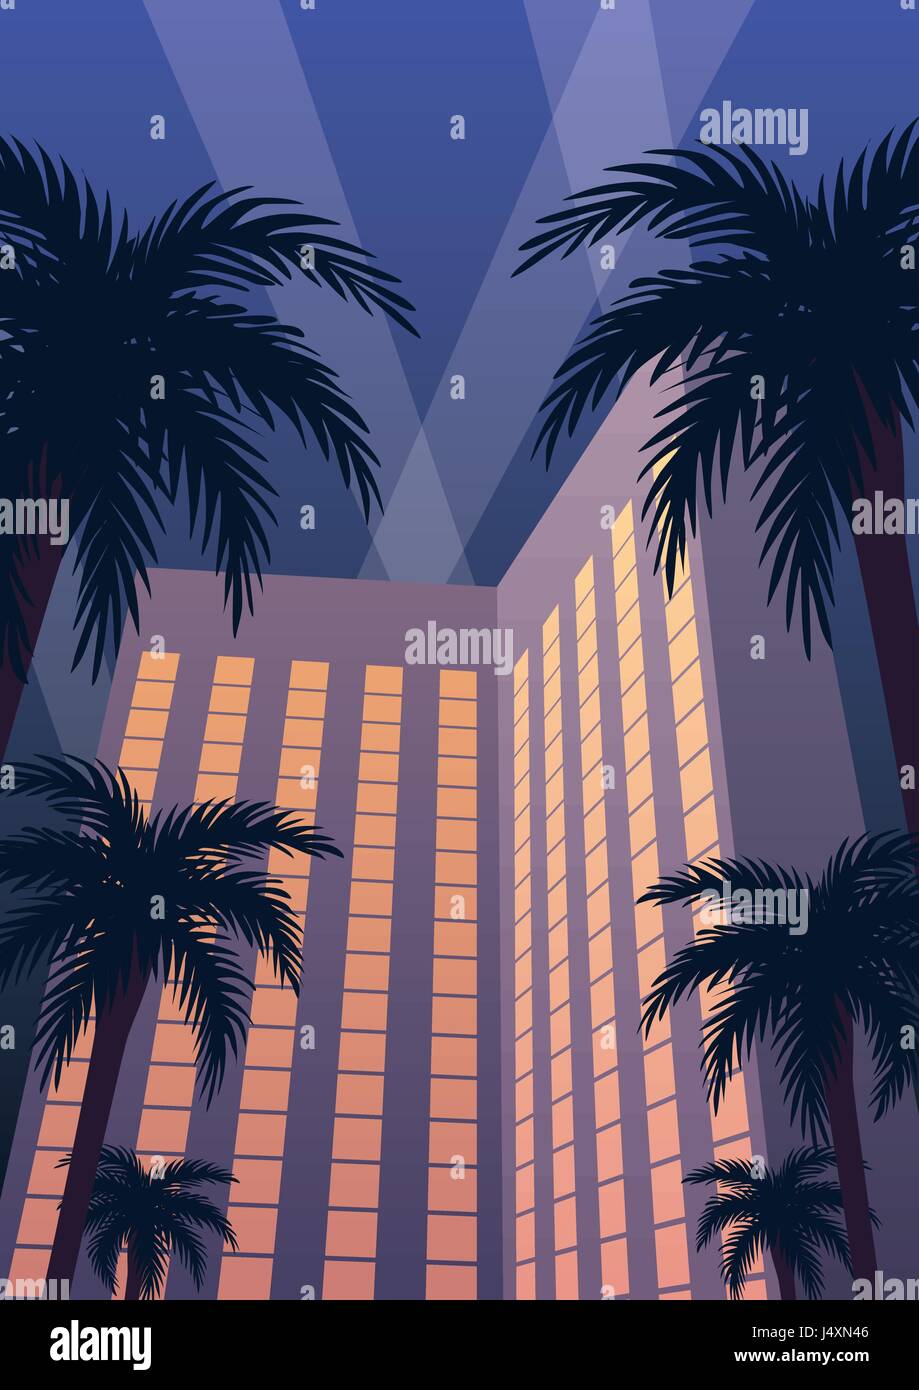 Hotel and casino resort at night in Art Deco style. Stock Vector